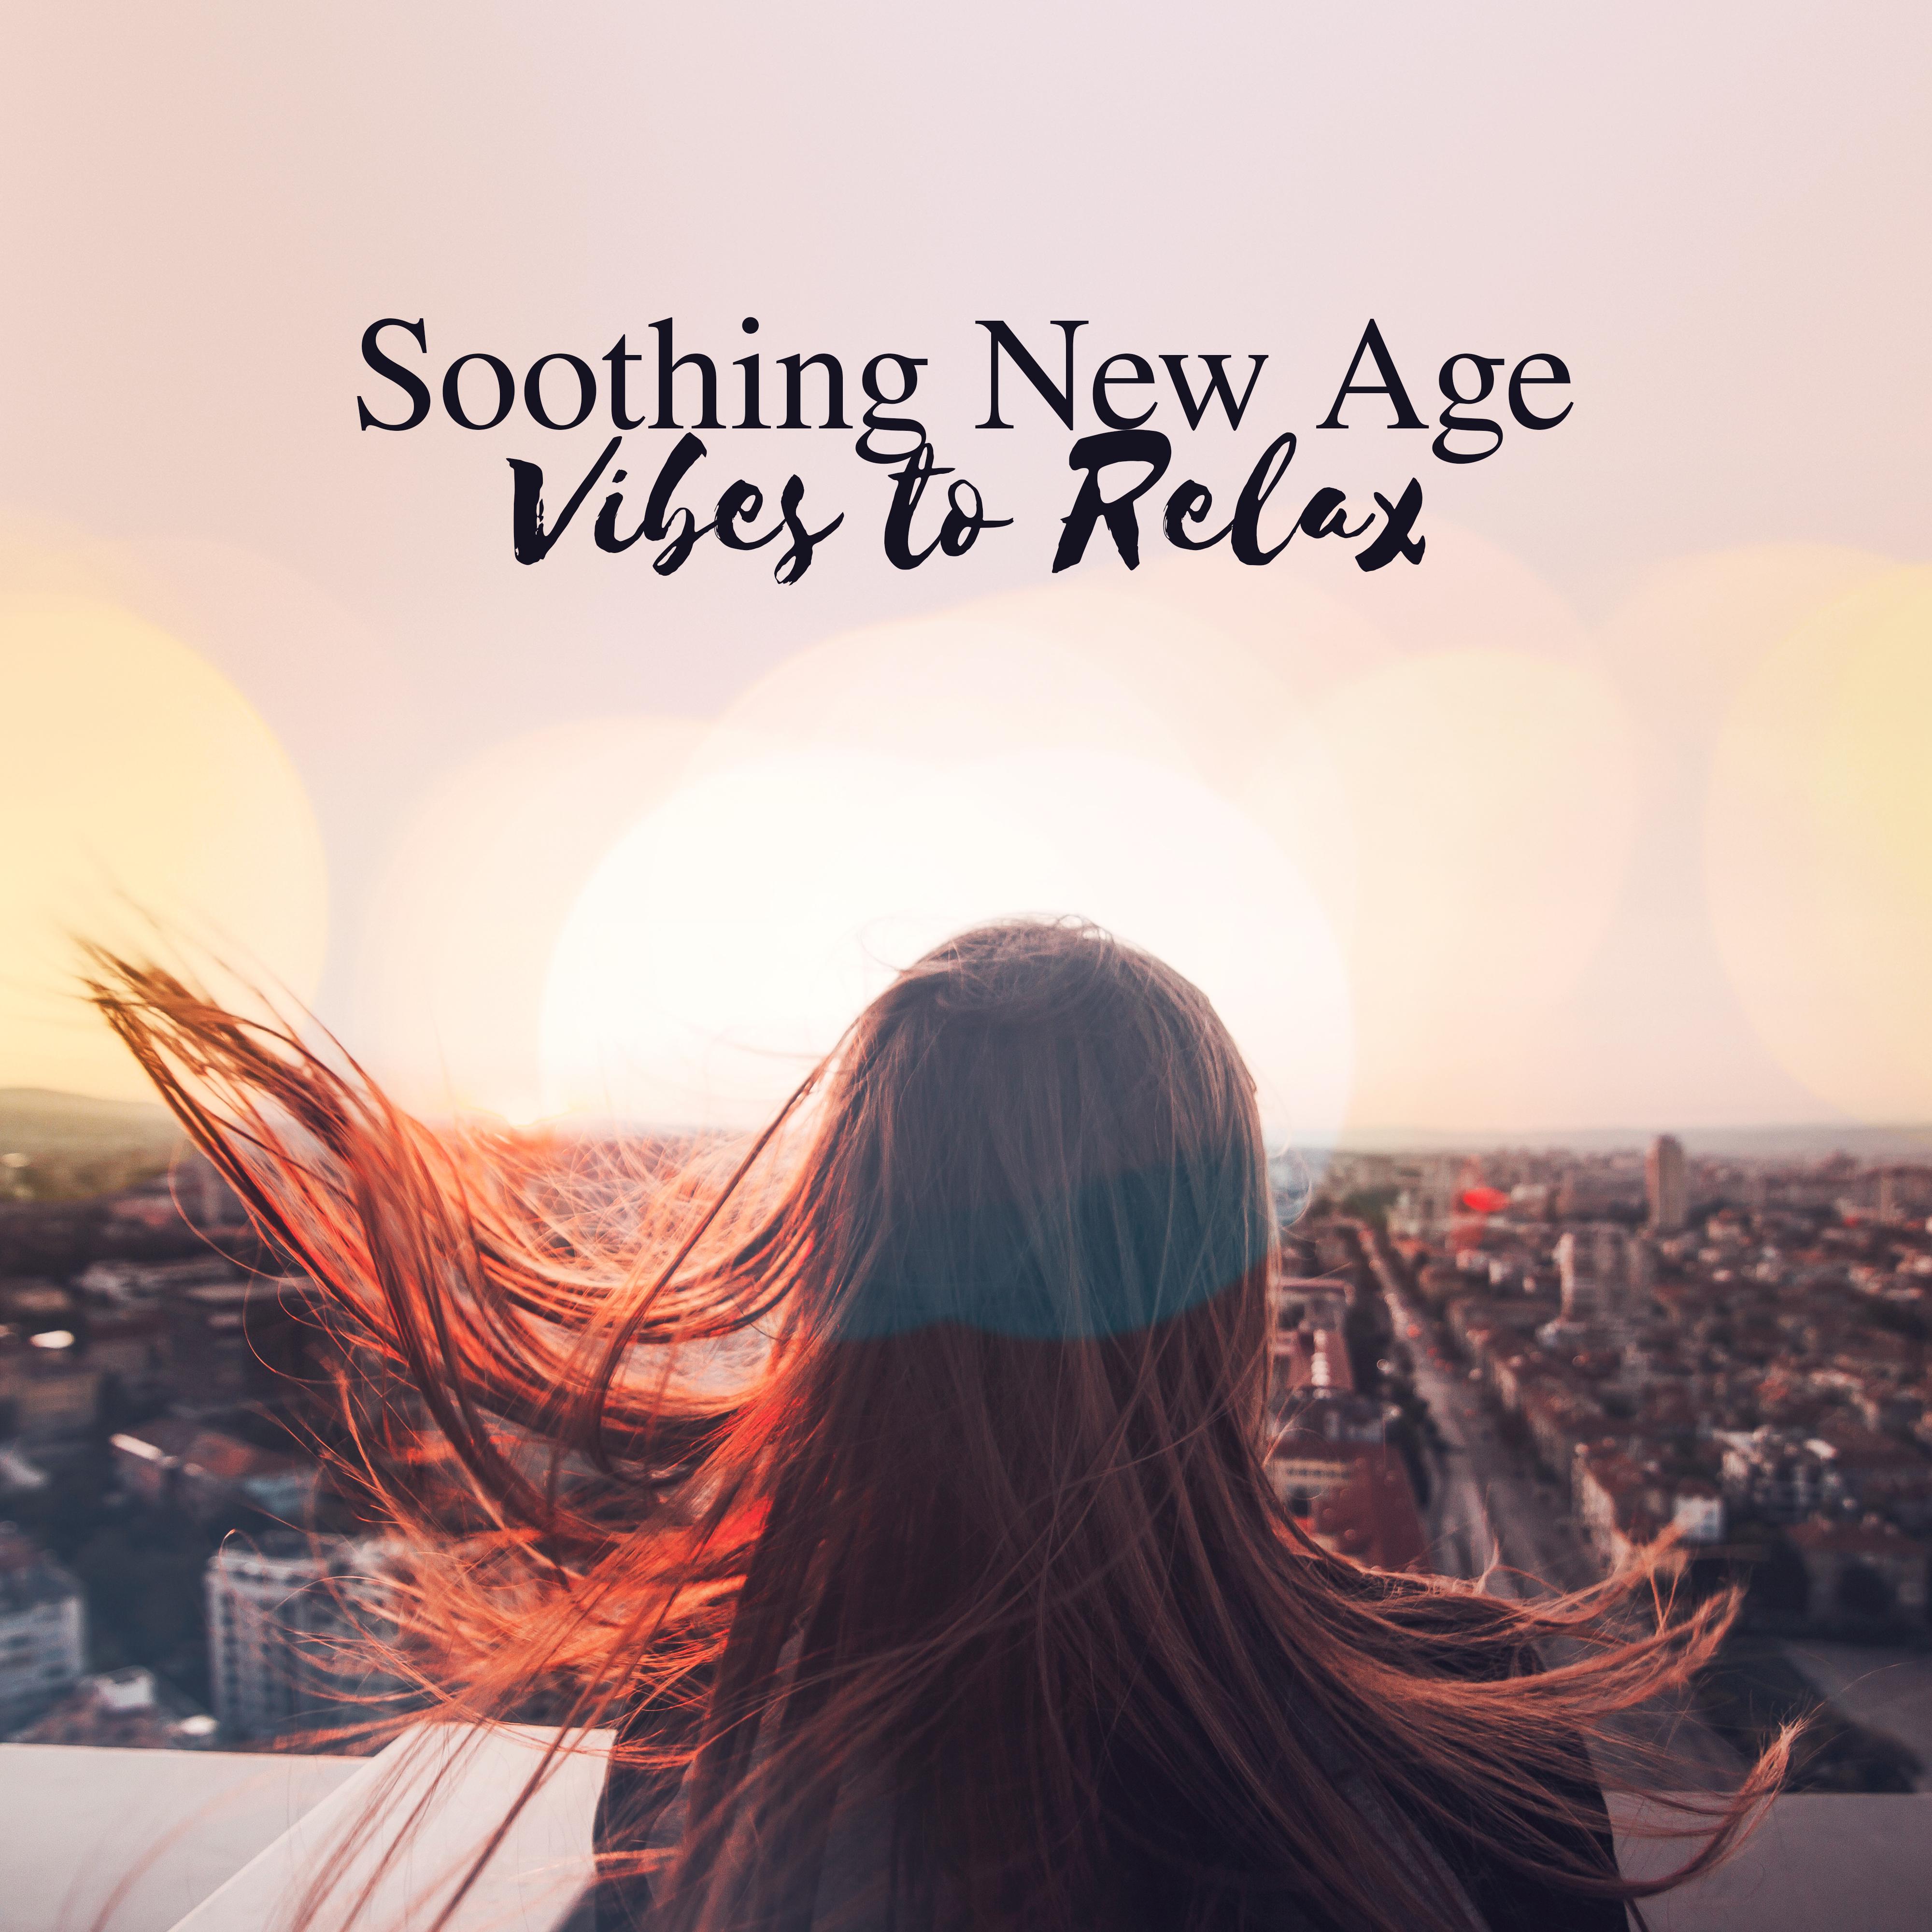 Soothing New Age Vibes to Relax